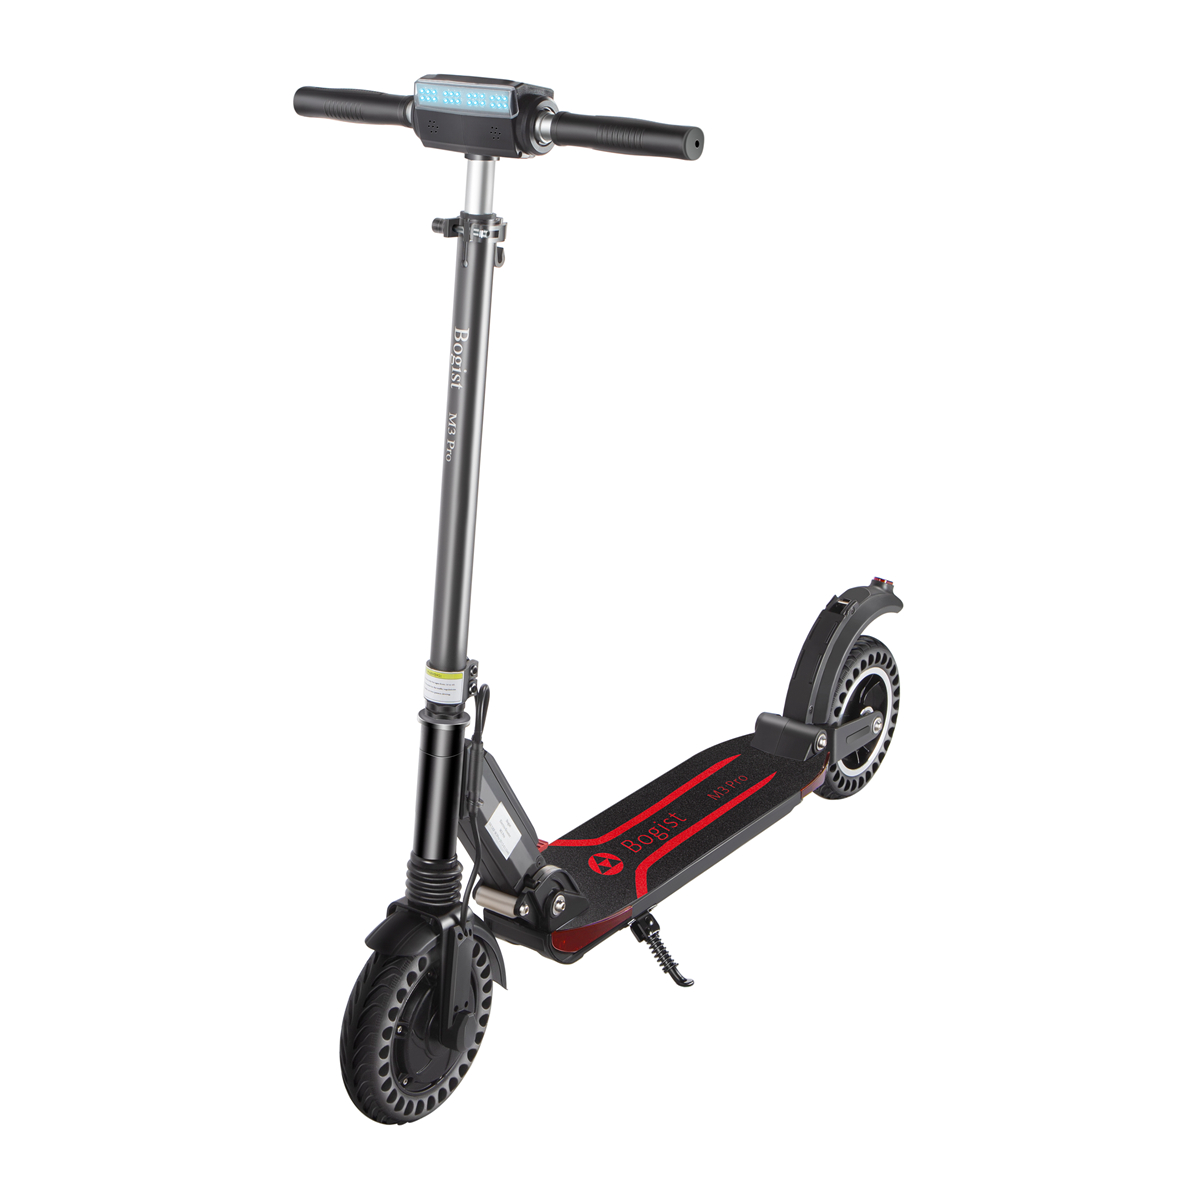 8-inch solid honeycomb tire scooter